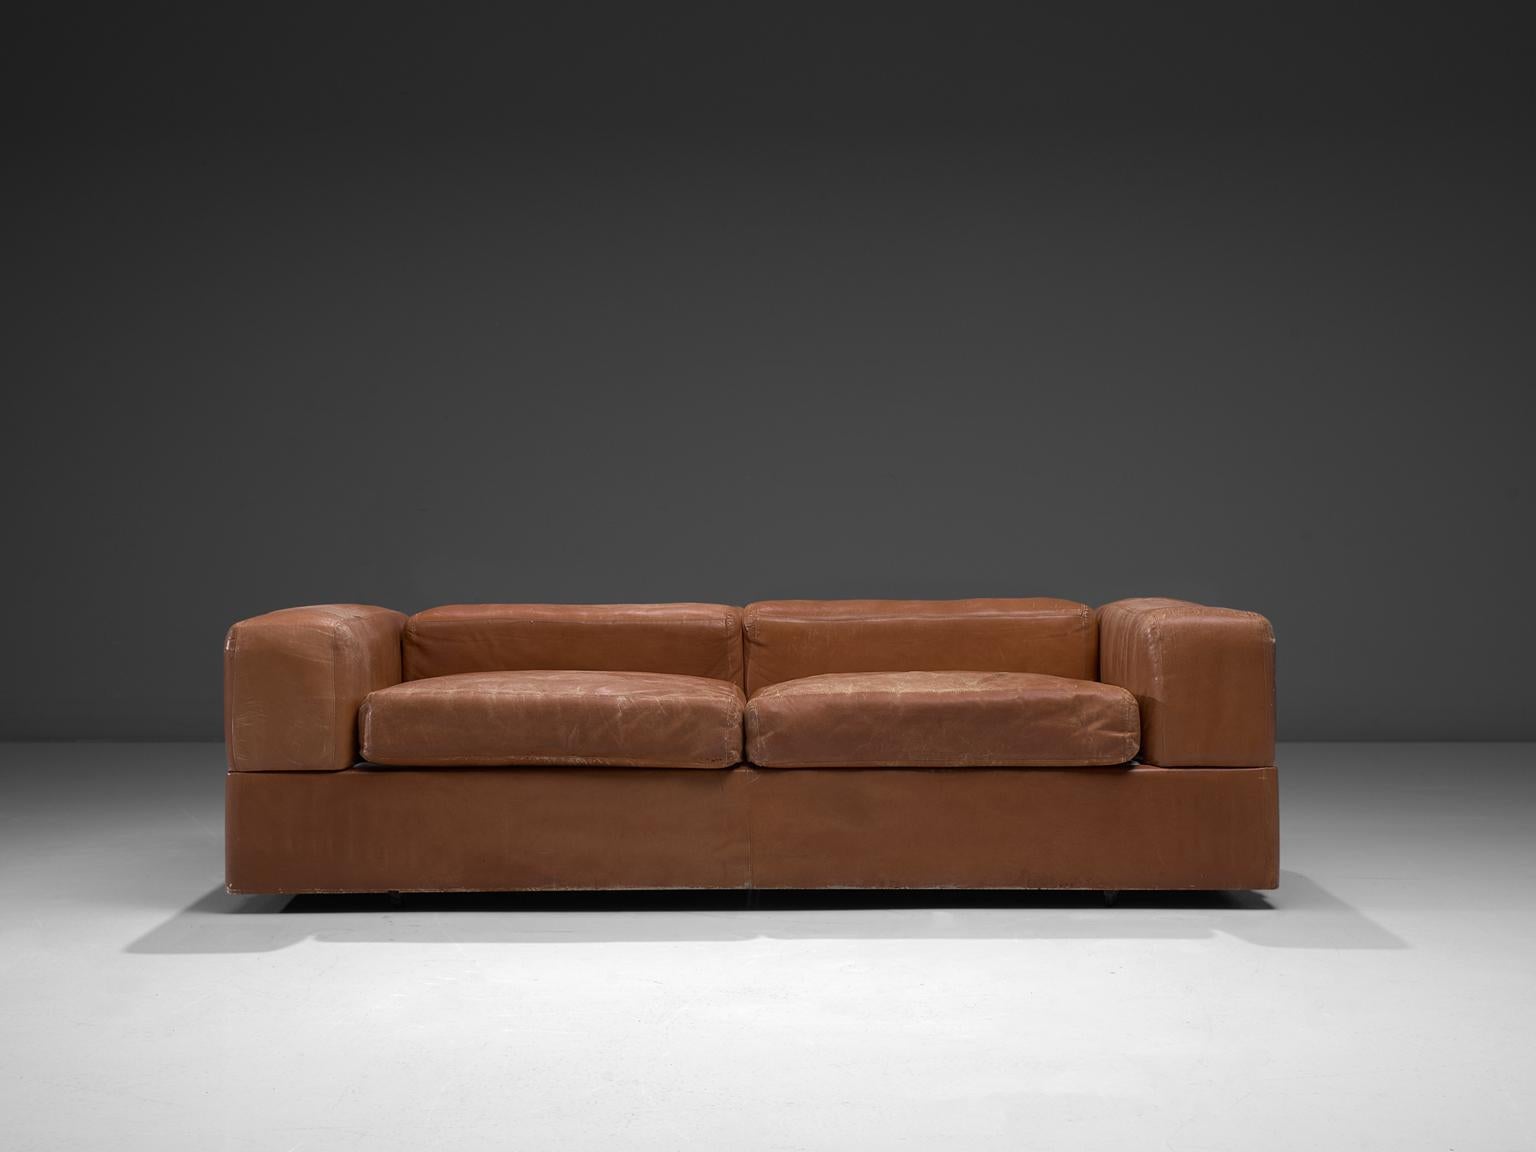 Tito Agnoli for Cinova, sofa bed 711 in cognac leather, Italy, 1960s

This Postmodern daybed and or sofa is designed by Tito Agnoli and manufactured by Cinova. The sofa has a wooden interior and features a metal spring seat. A mattress covered